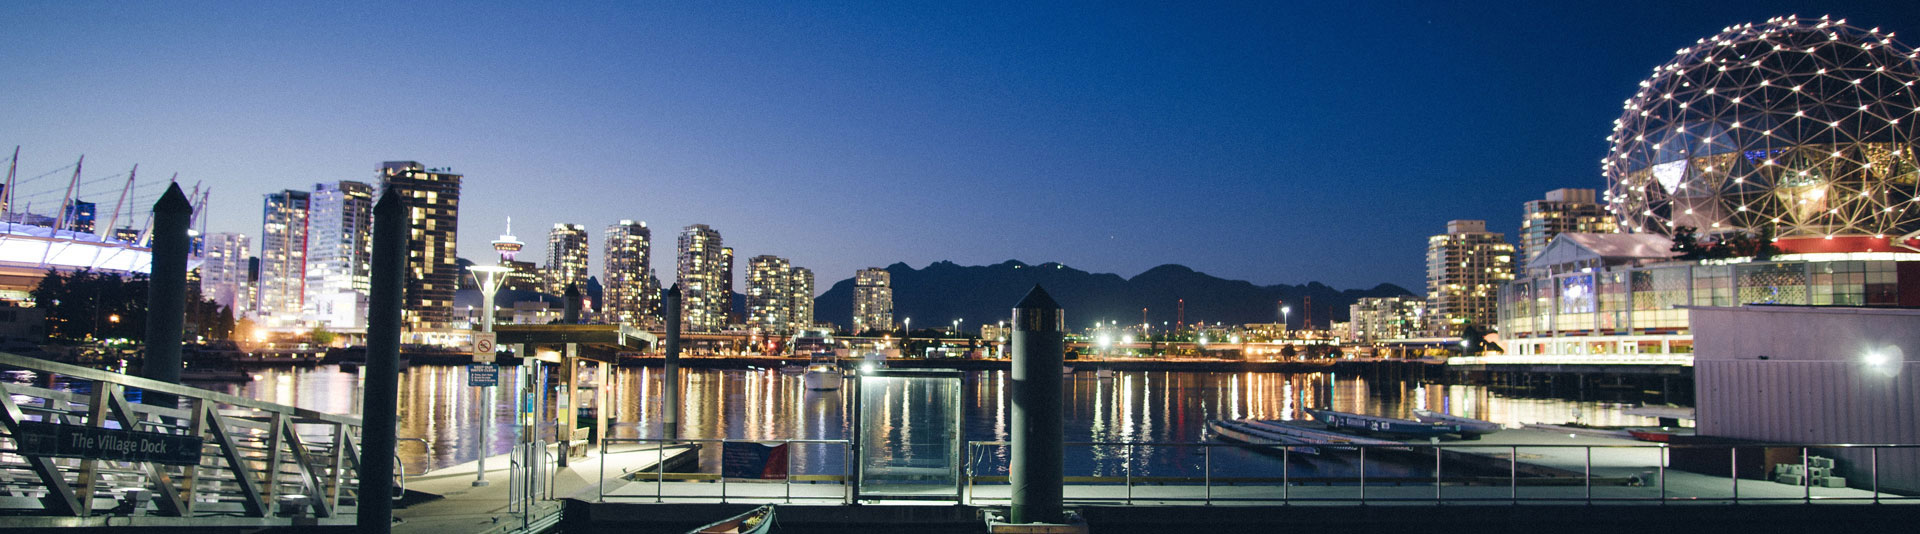 Canada Gas & LNG Exhibition and Conference Vancouver 2019